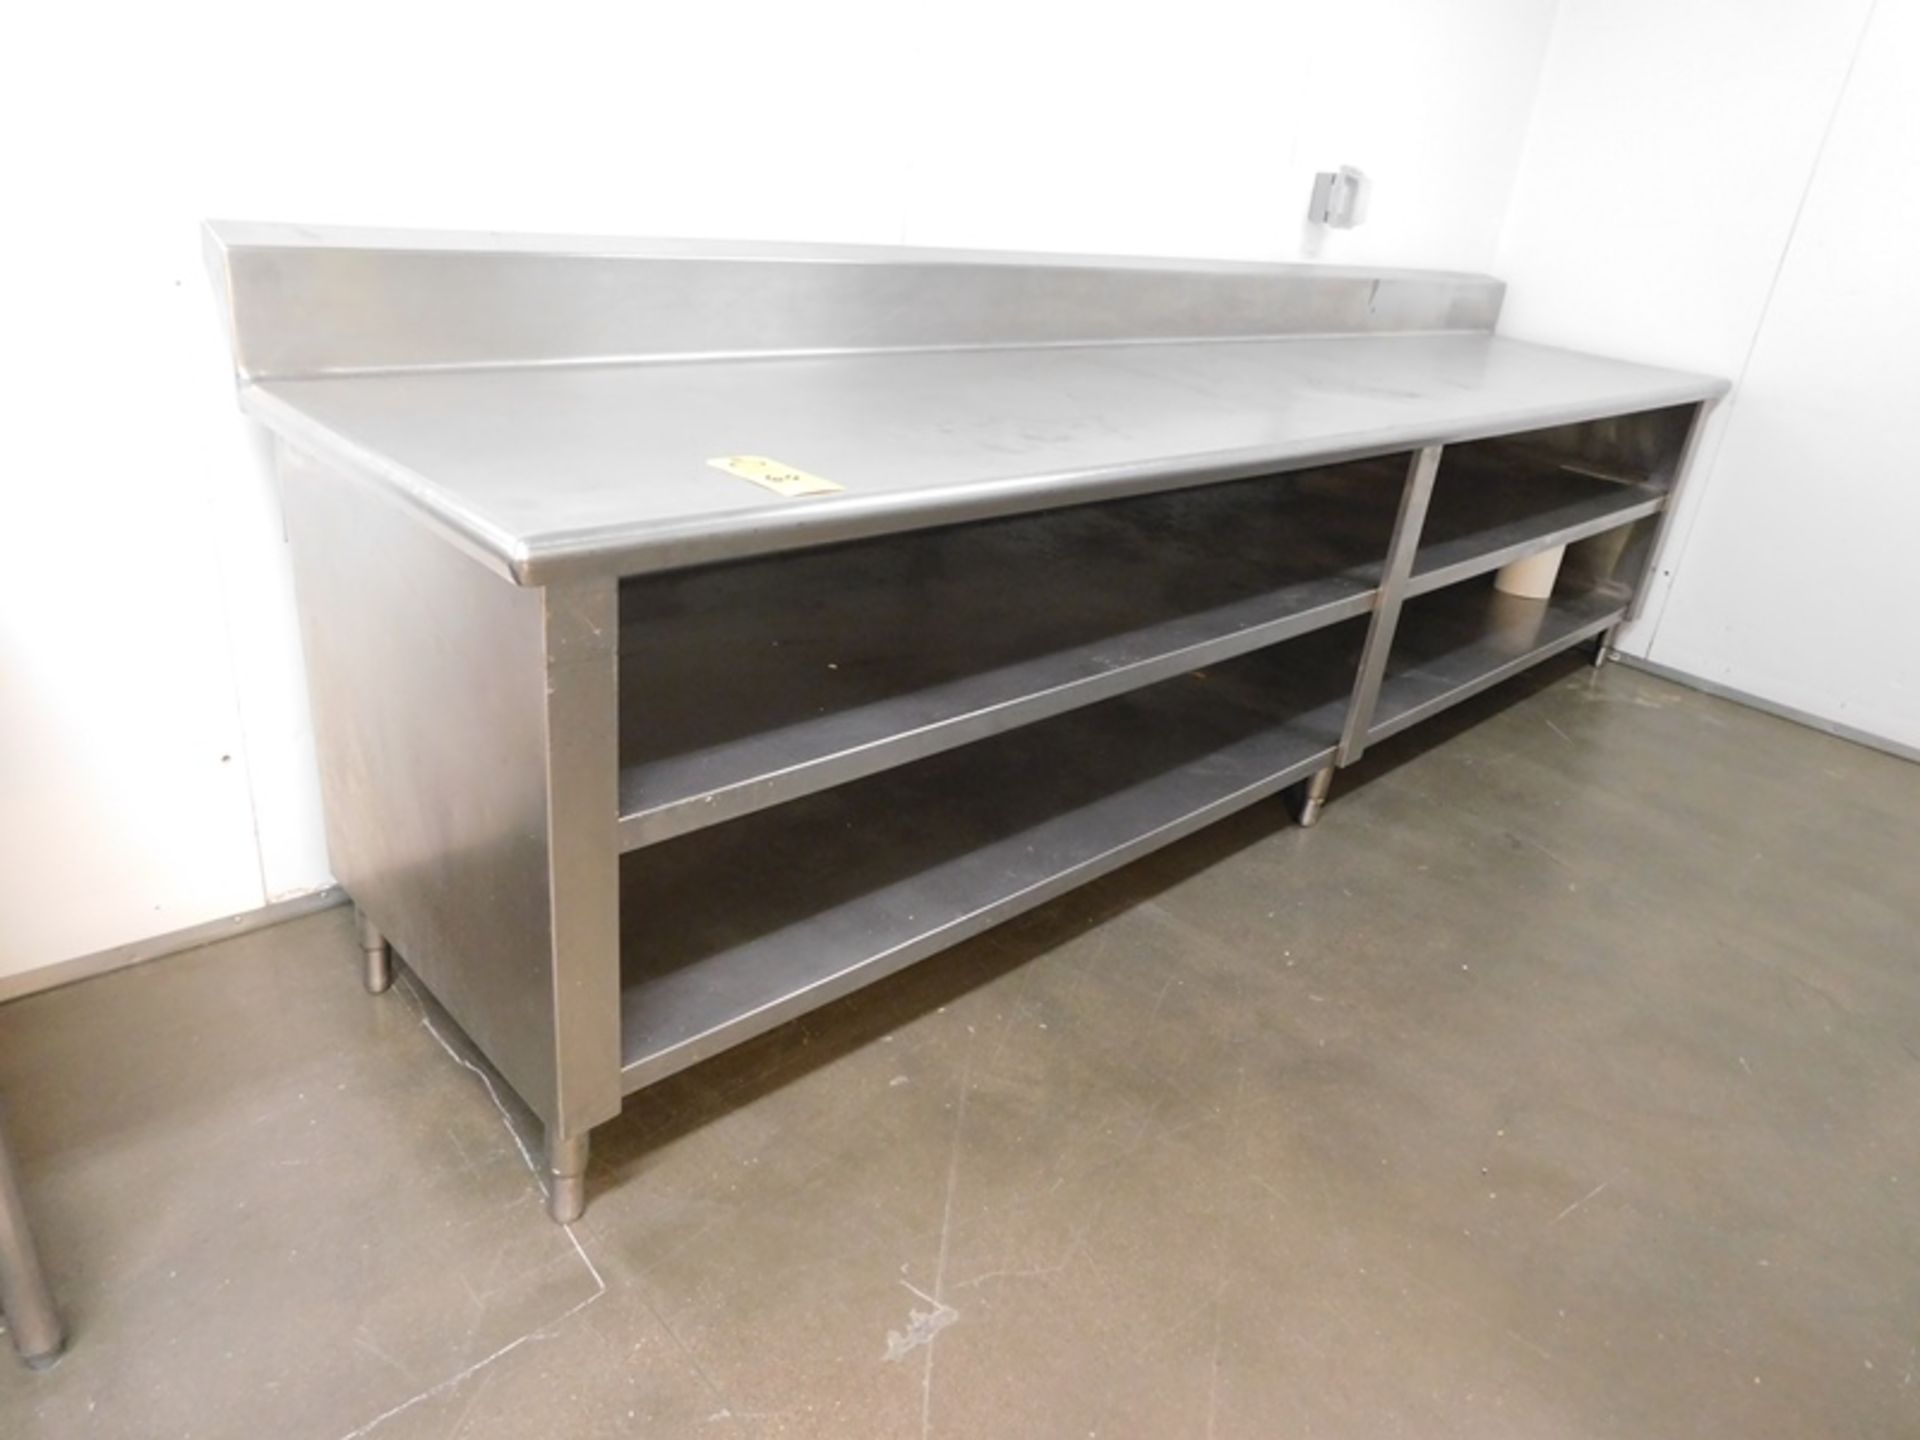 Stainless Steel Table with 6" backsplash and two stainless steel shelves, 141" X 30" X 34" -(